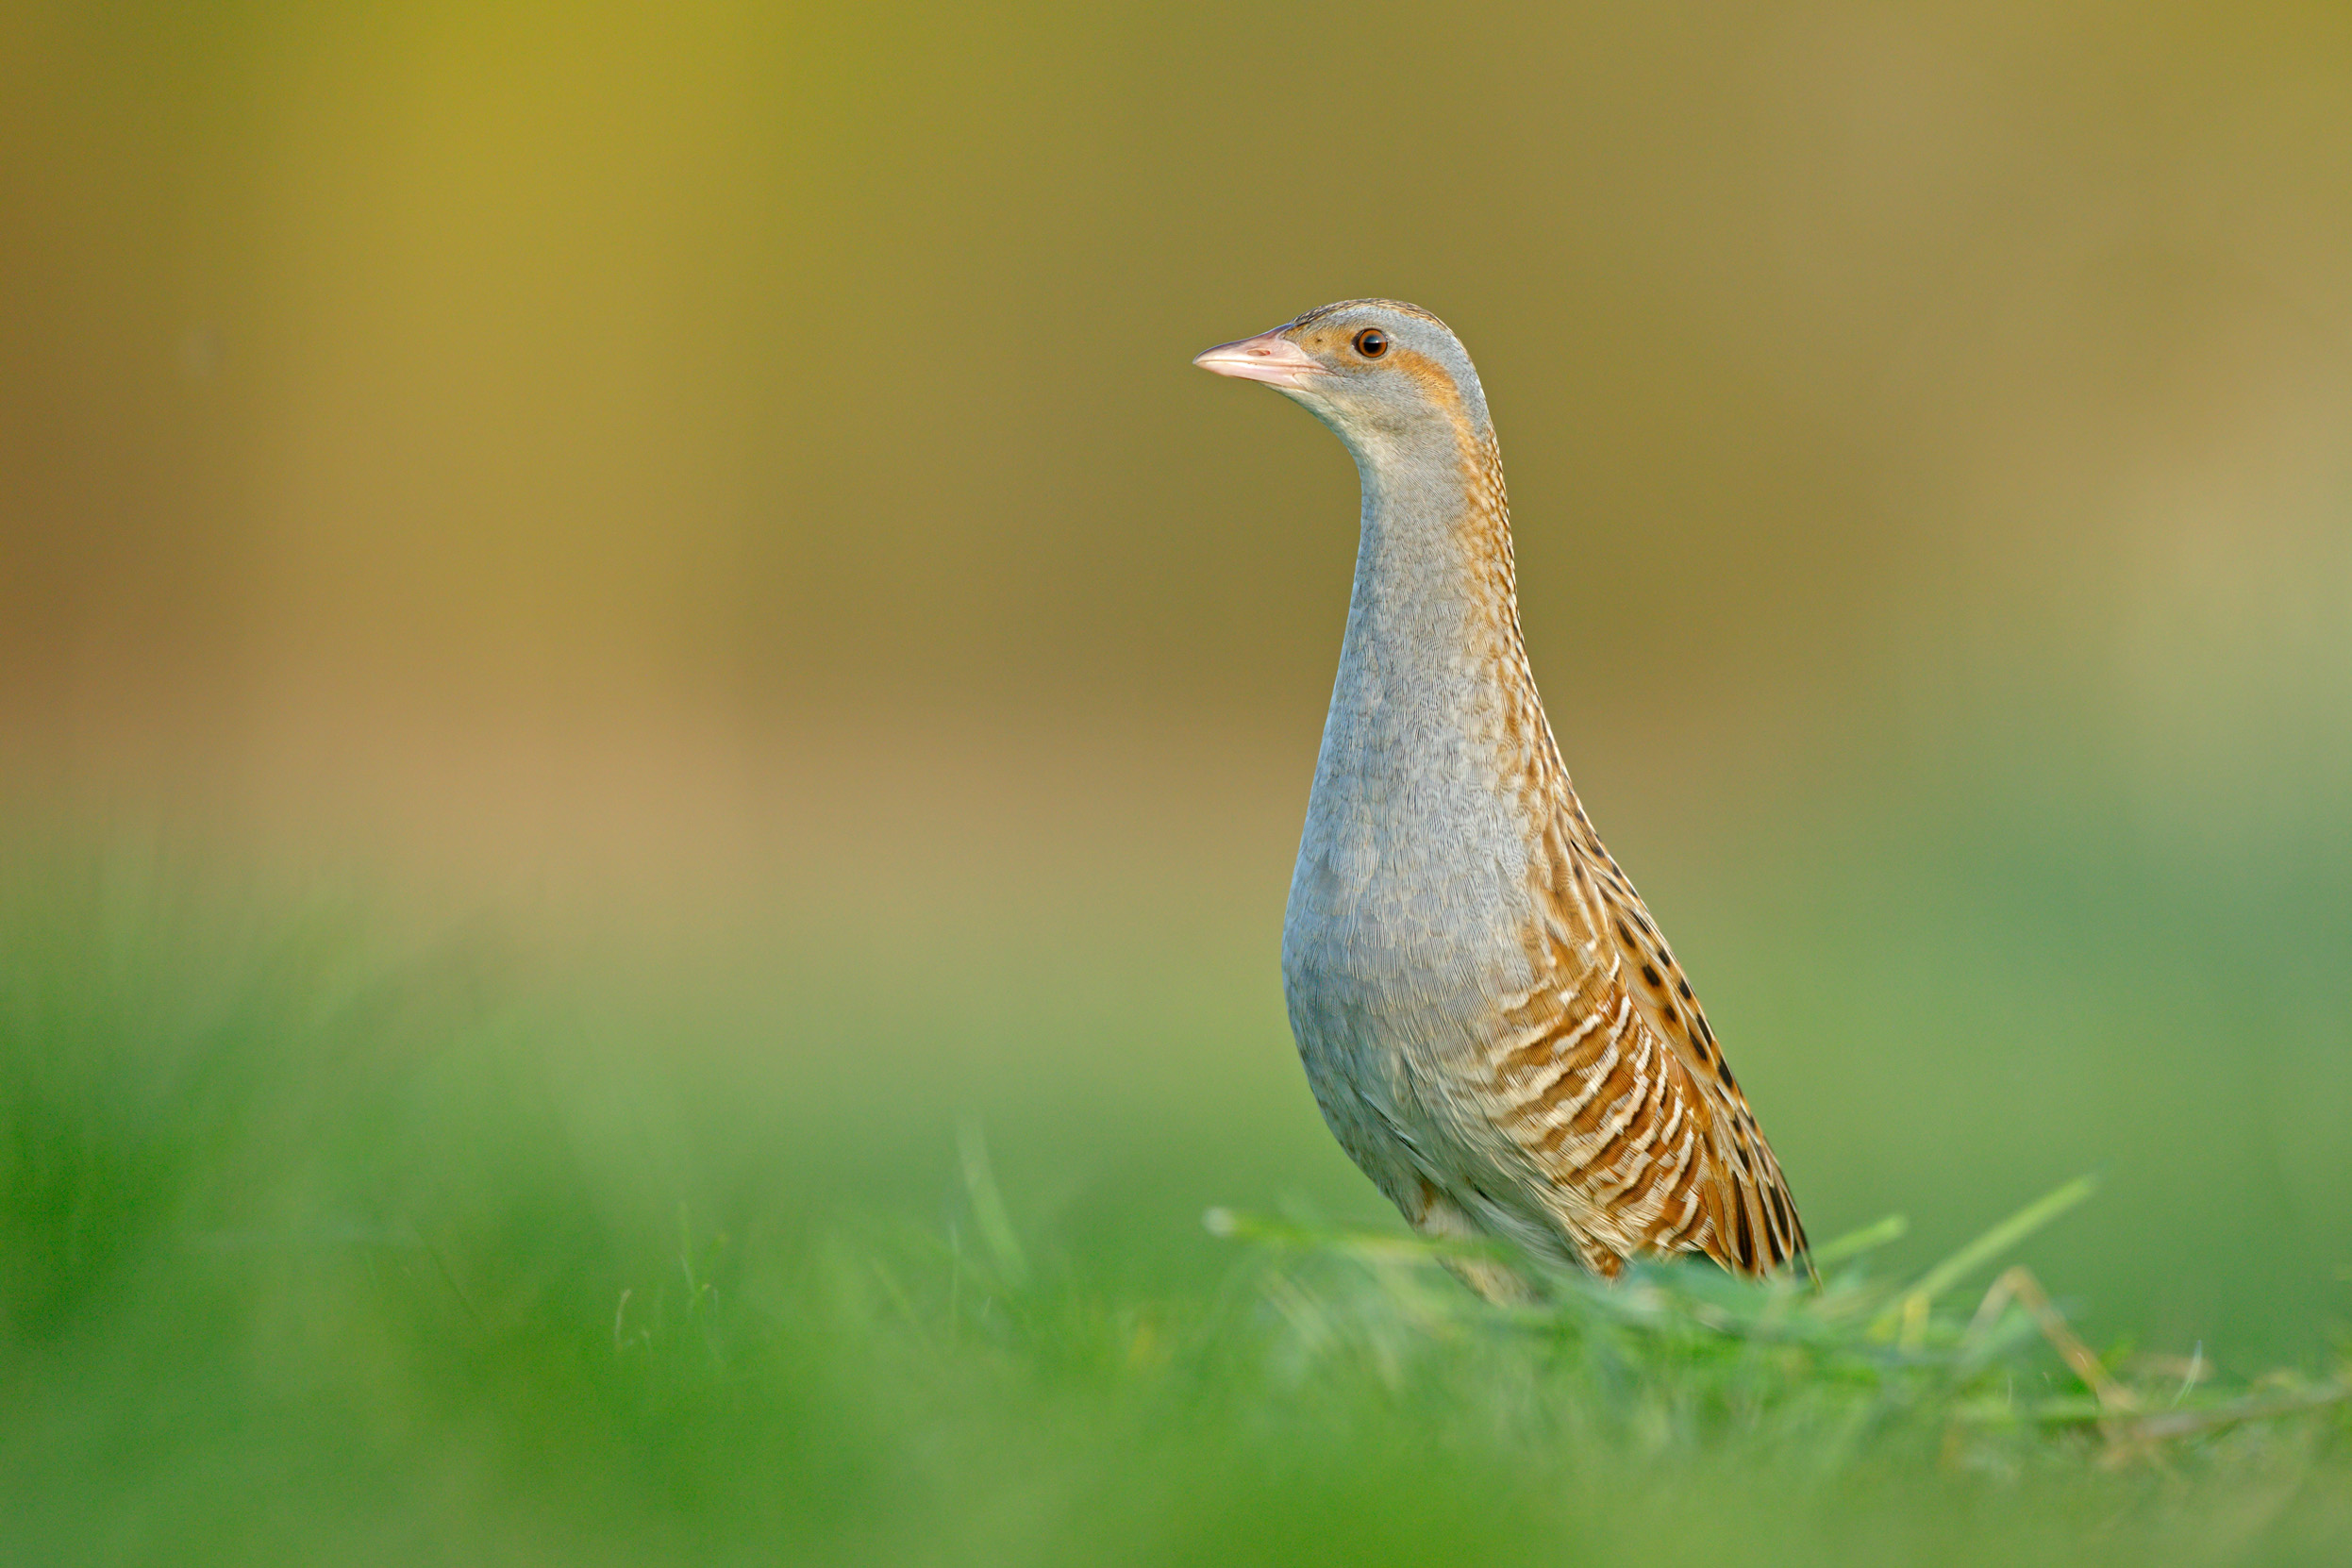 A lone Corncrake stood tall in a grassy meadow.